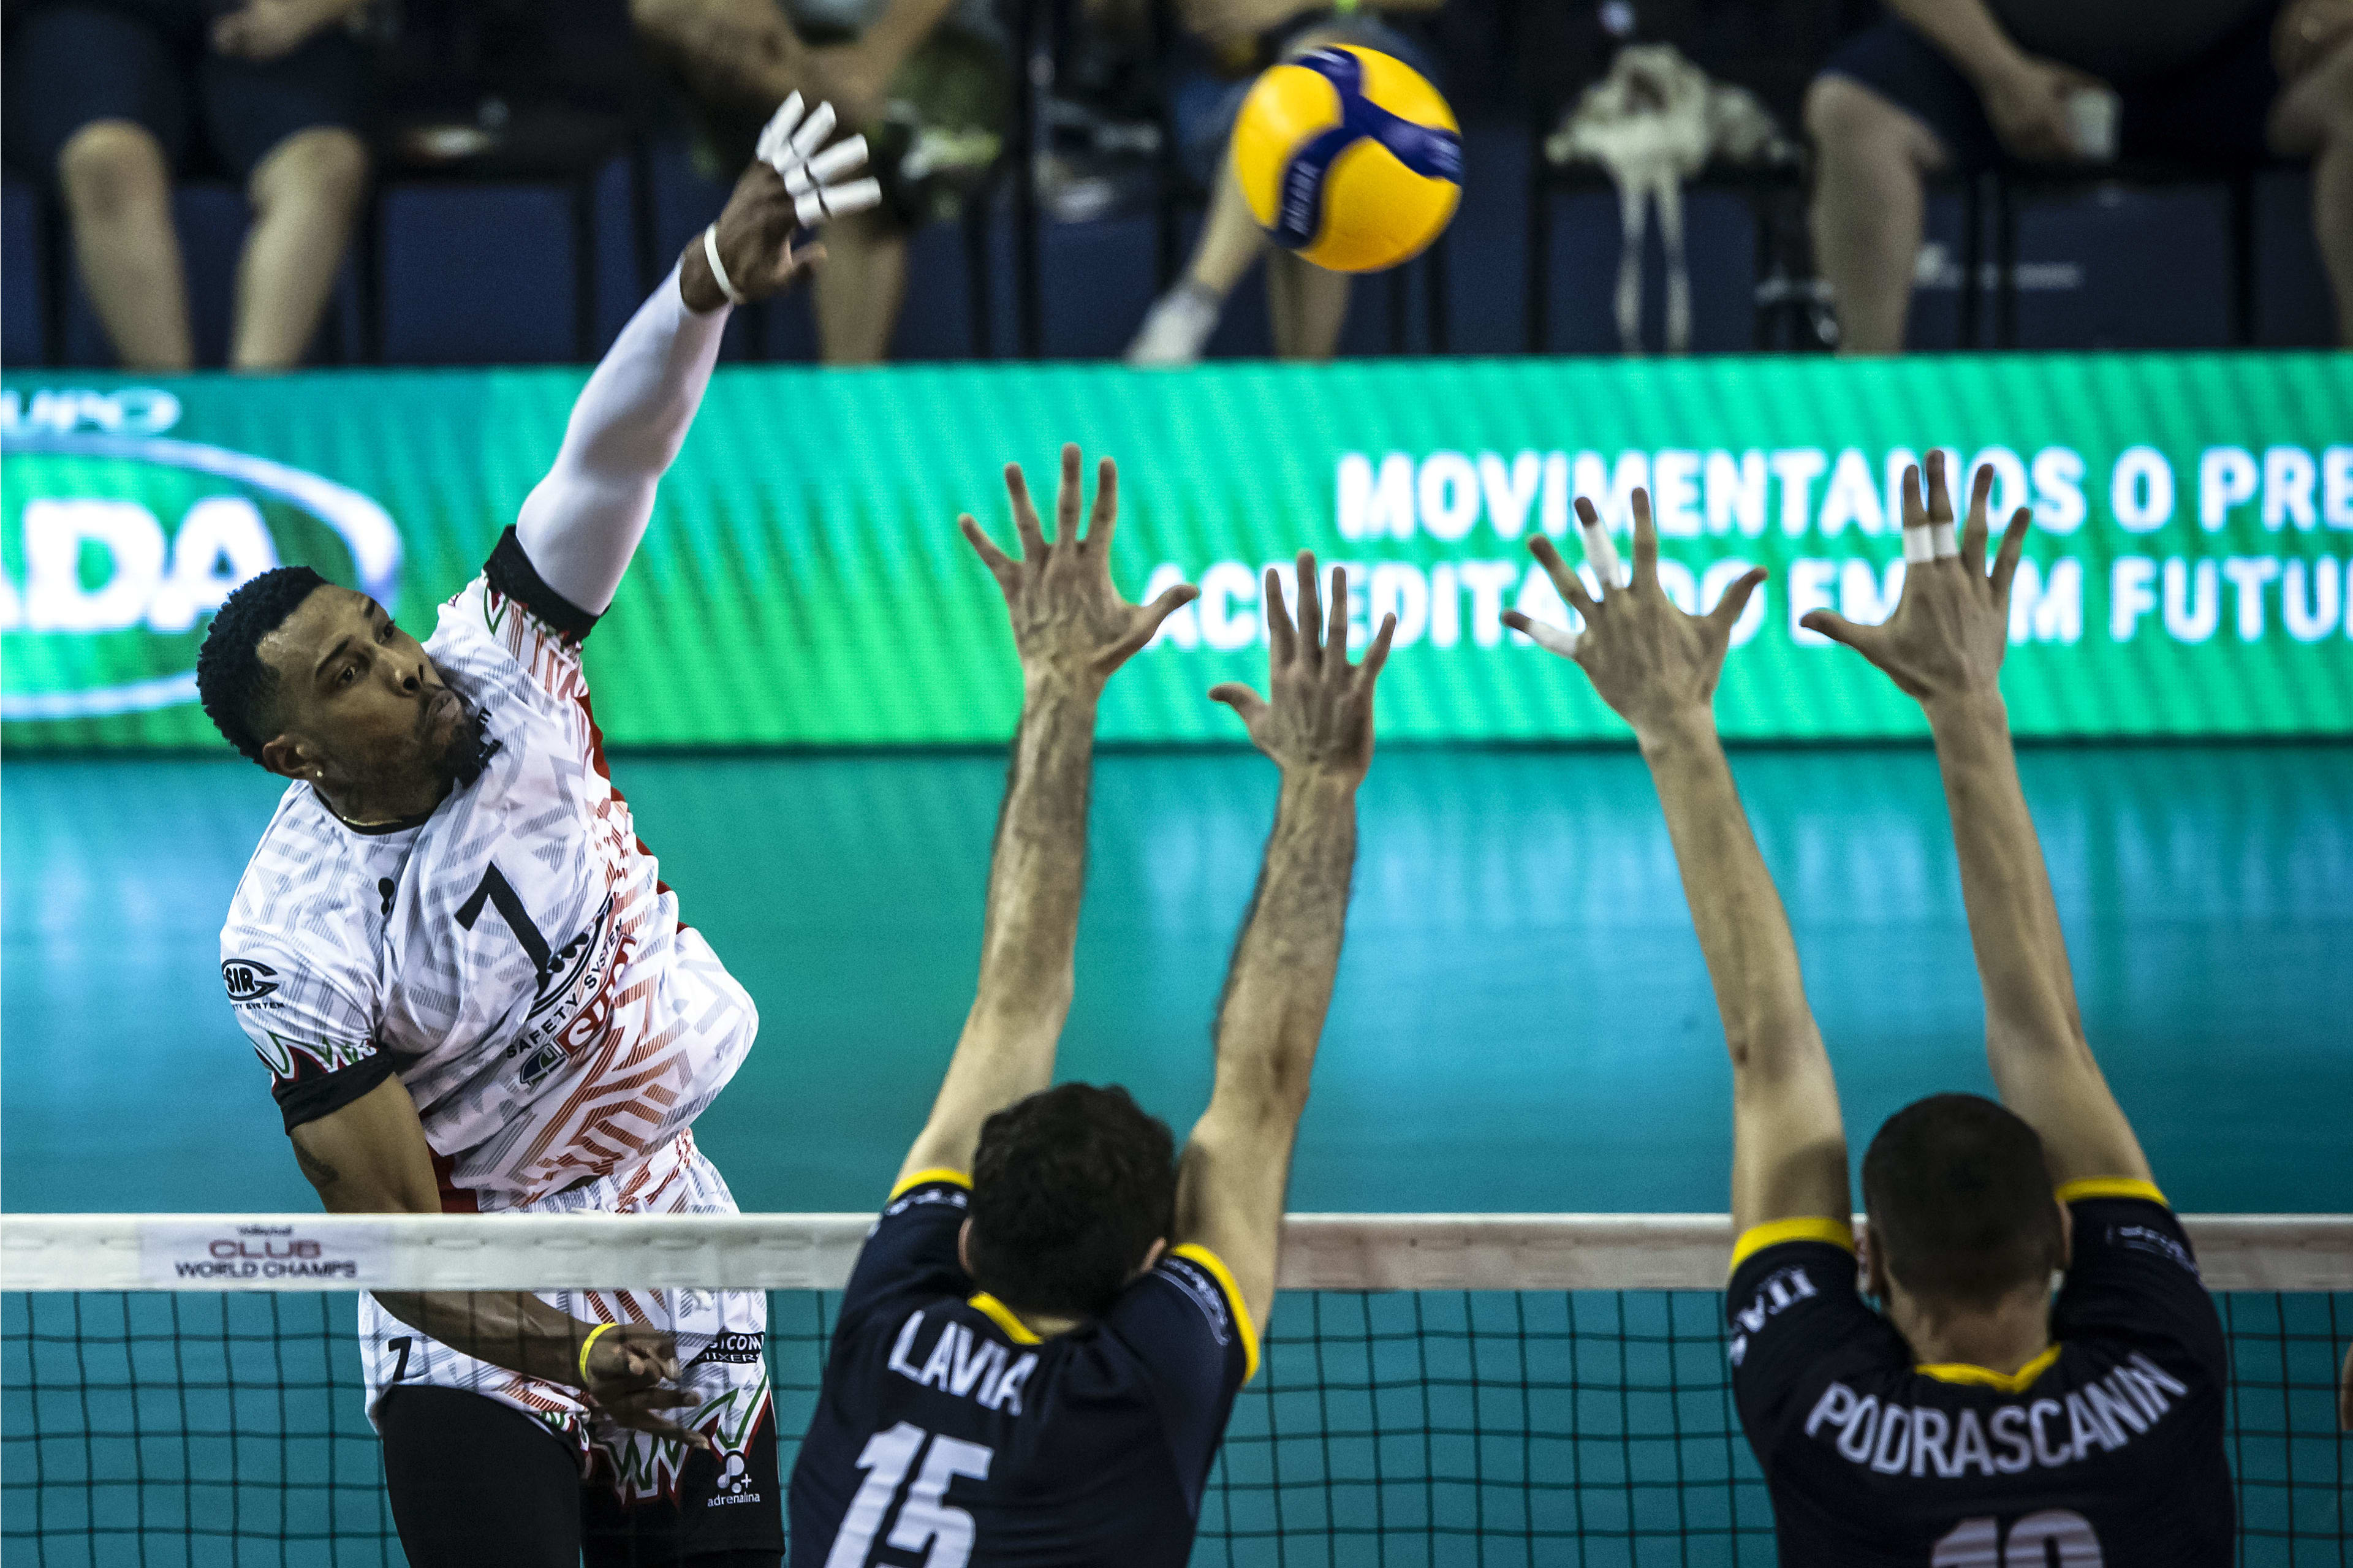 Perugia return to SuperLega as newly crowned world champs volleyballworld